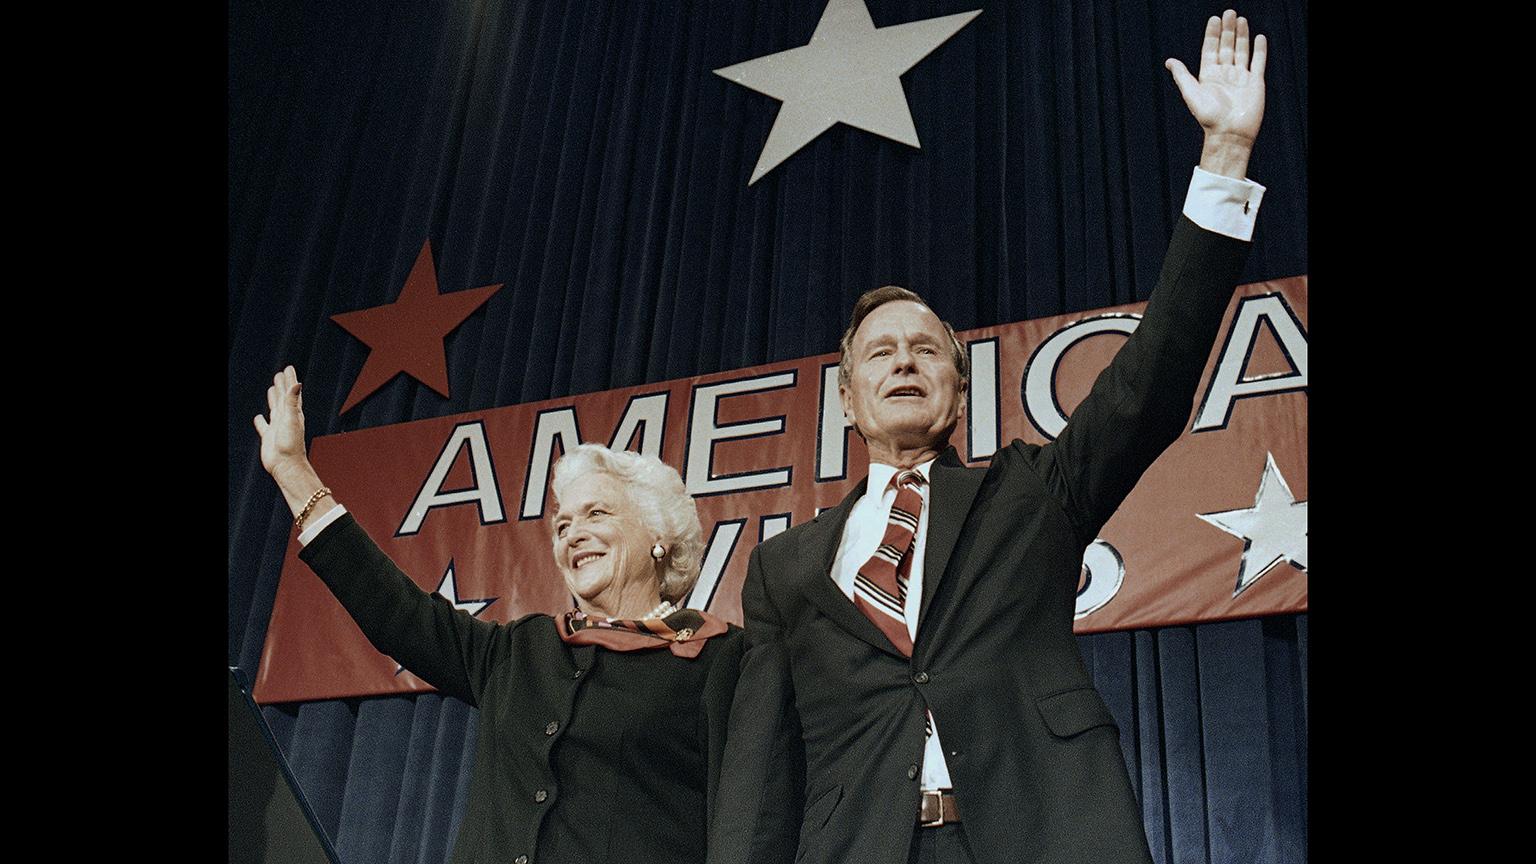 In this Nov. 8, 1988 file photo, President-elect George H.W. Bush and his wife Barbara wave to supporters in Houston, Texas after winning the presidential election. (AP Photo / Scott Applewhite, File)